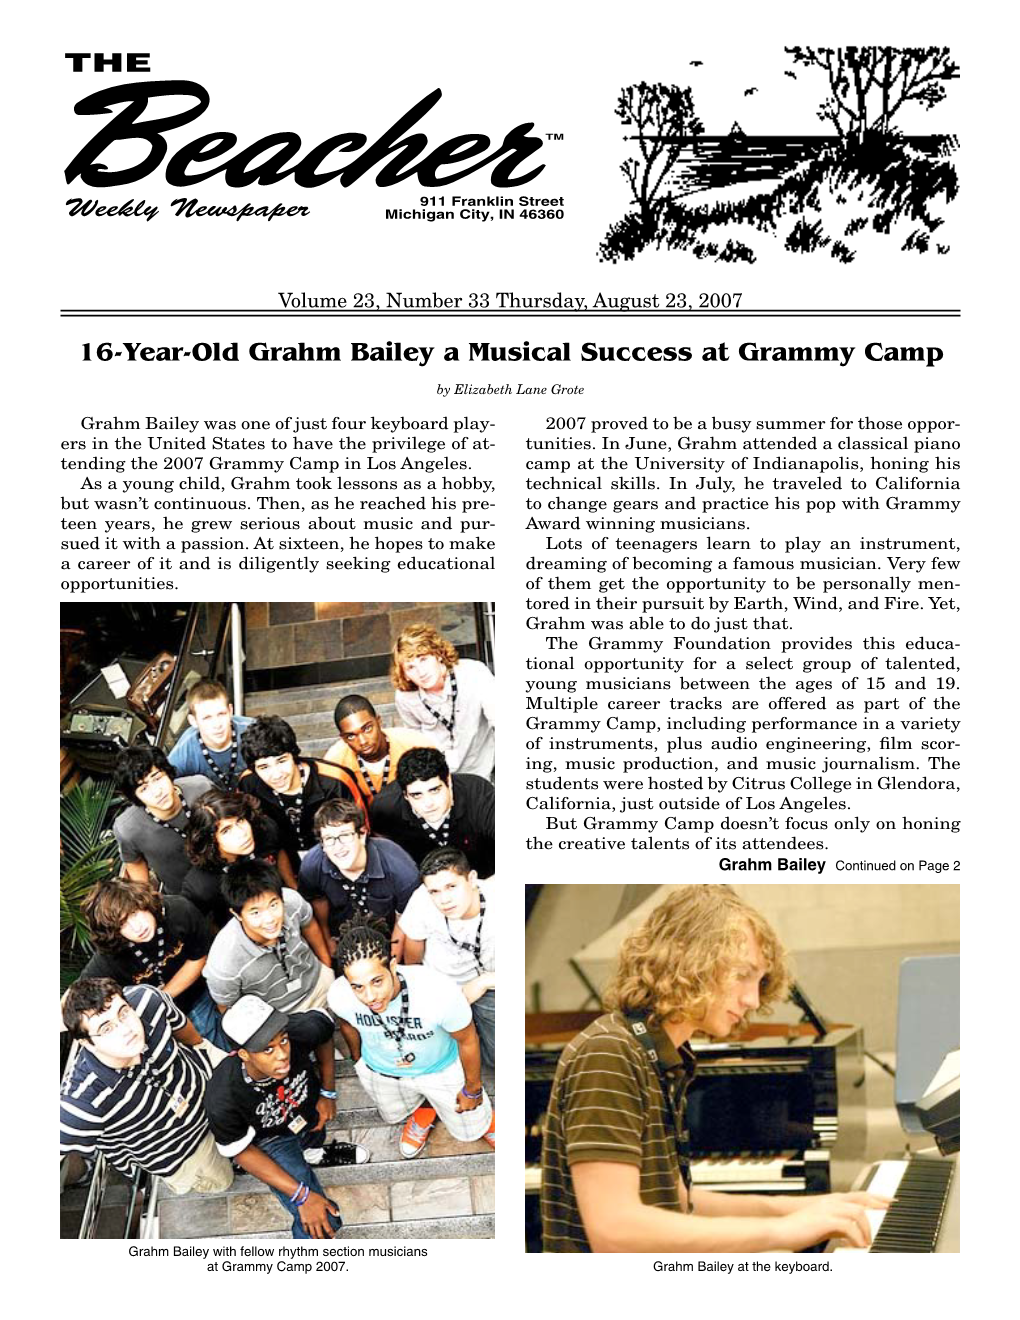 16-Year-Old Grahm Bailey a Musical Success at Grammy Camp